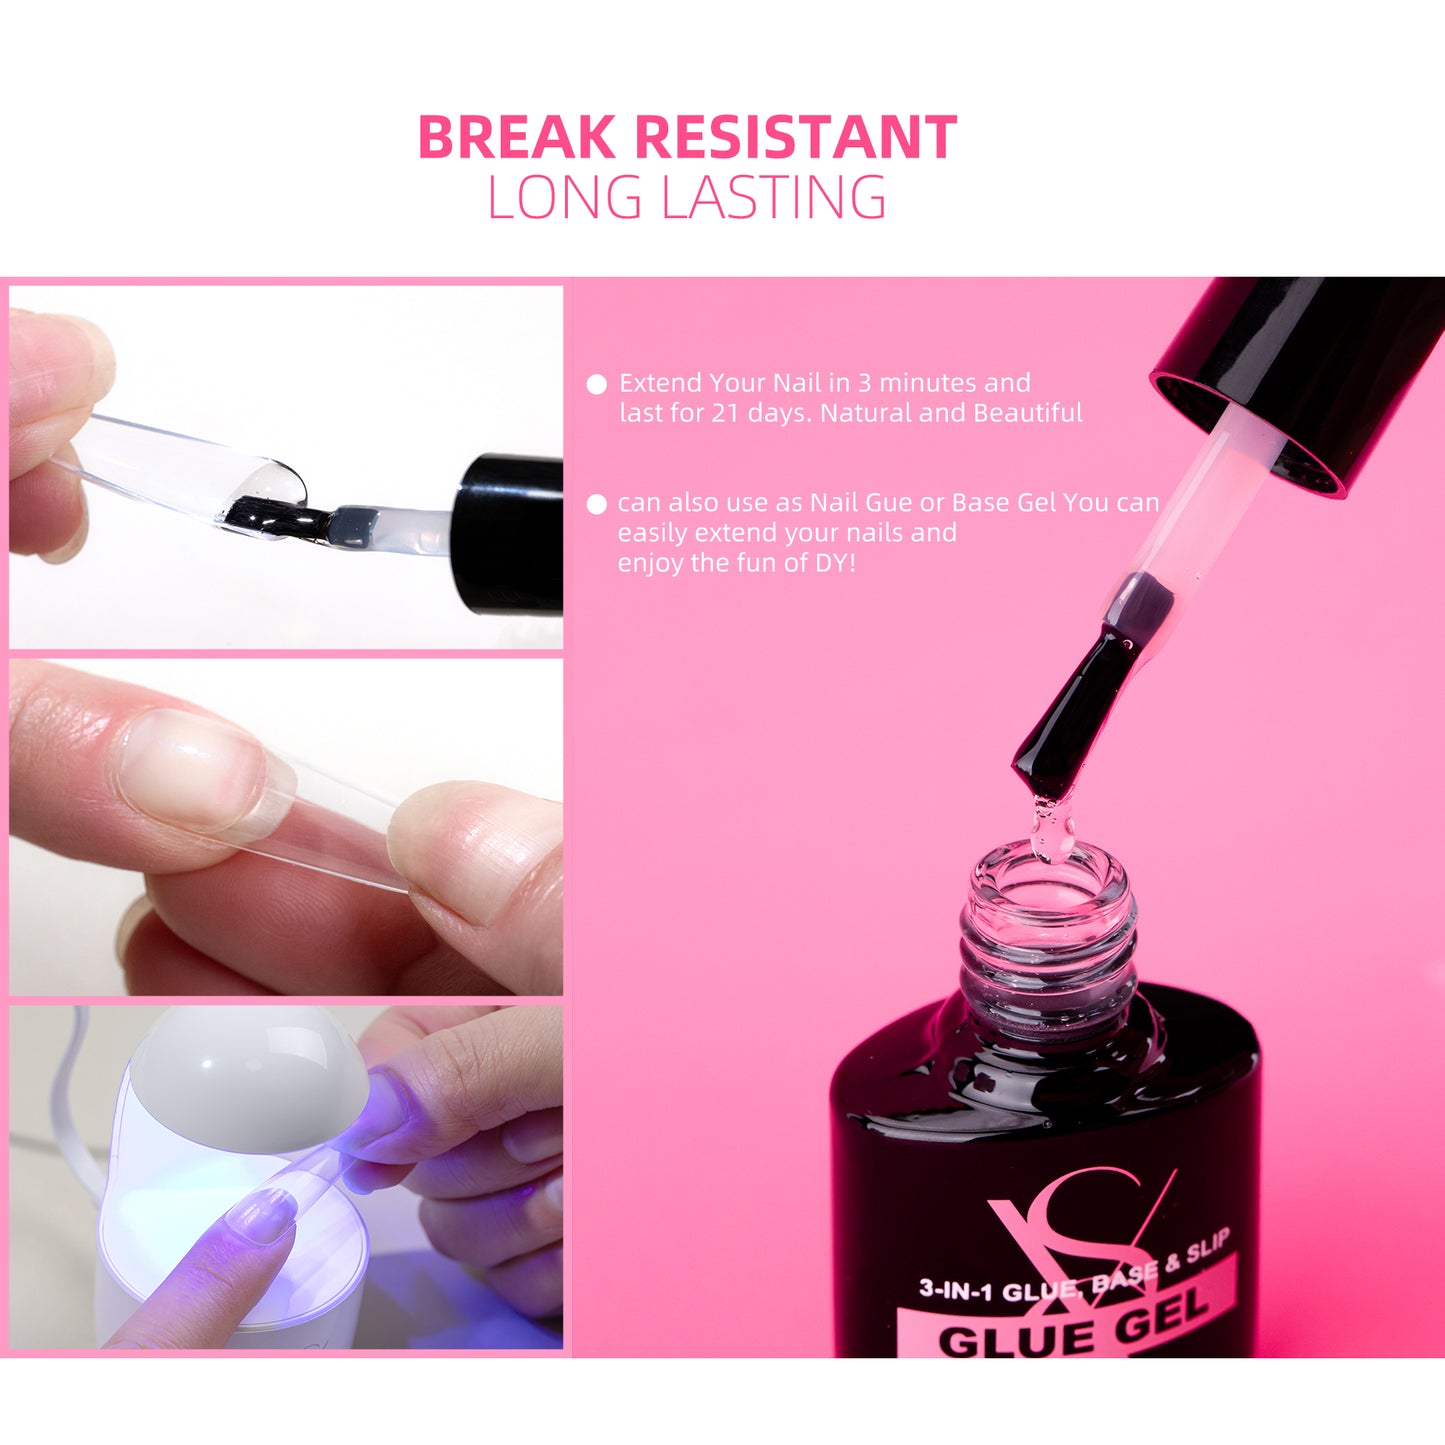 Load image into Gallery viewer, SXC Gel X Nail Kit with XXL Nail Tips and Glue Gel for beginners!
